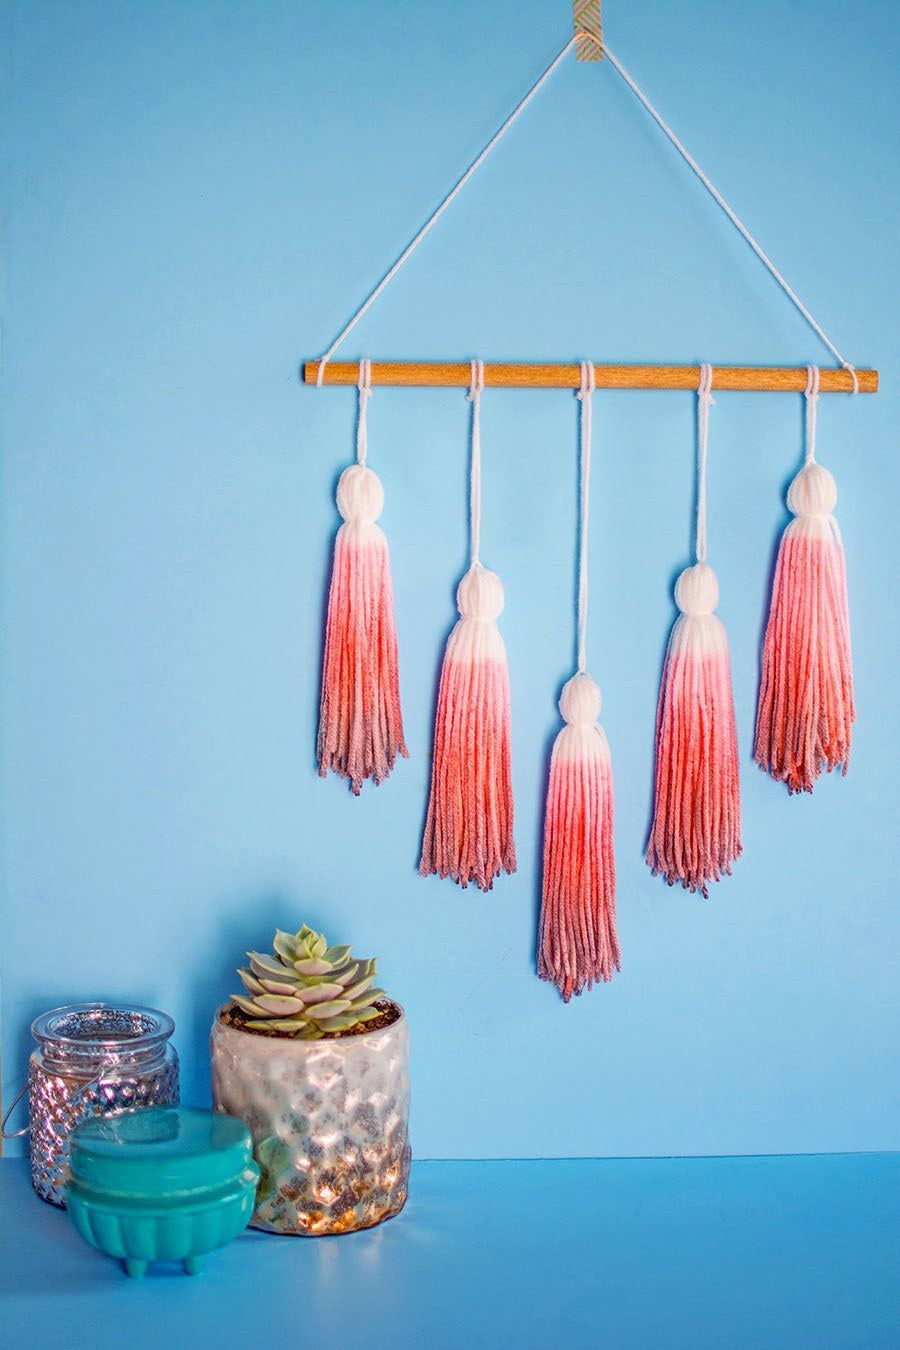 Or use tassels and a wooden dowel for neat wall decor. - Or use tassels and a wooden dowel for neat wall decor. -   19 diy For Teens at home ideas